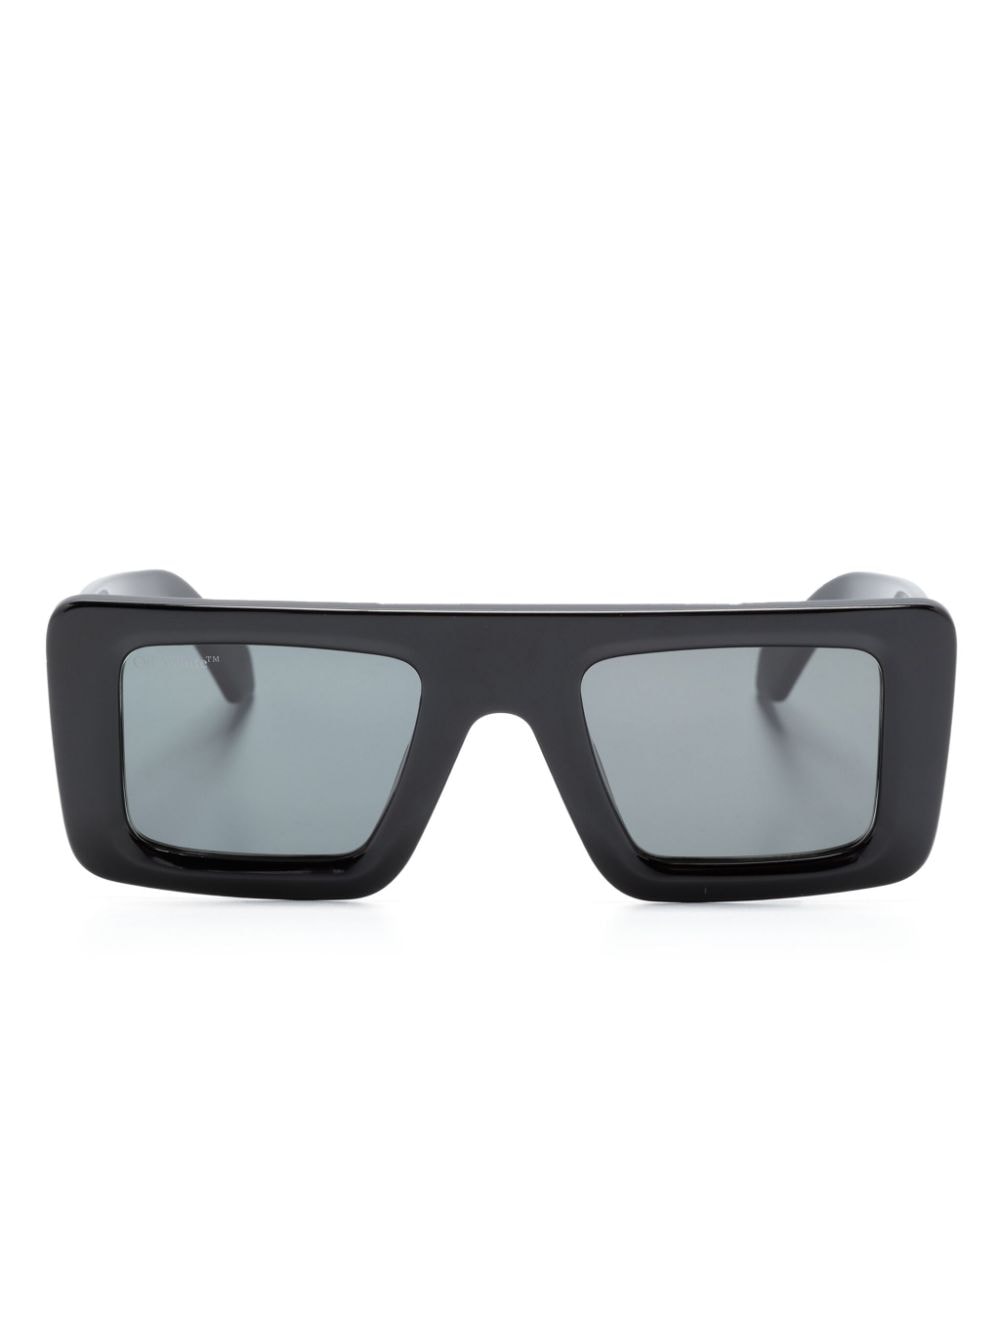 Sunglasses Off-White Grey in Other - 29089301